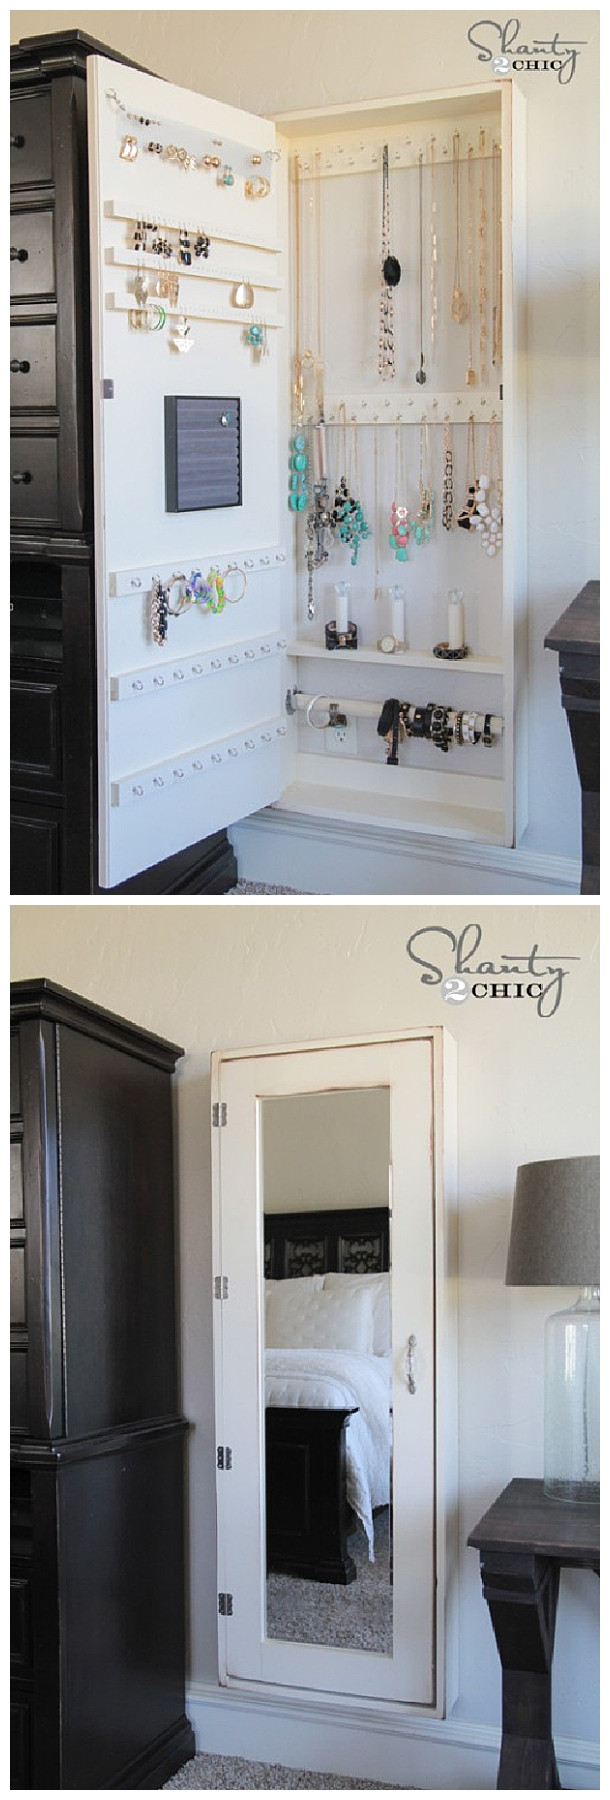 DIY Vanity Organizer
 EASY Inexpensive Do it Yourself Ways to Organize and